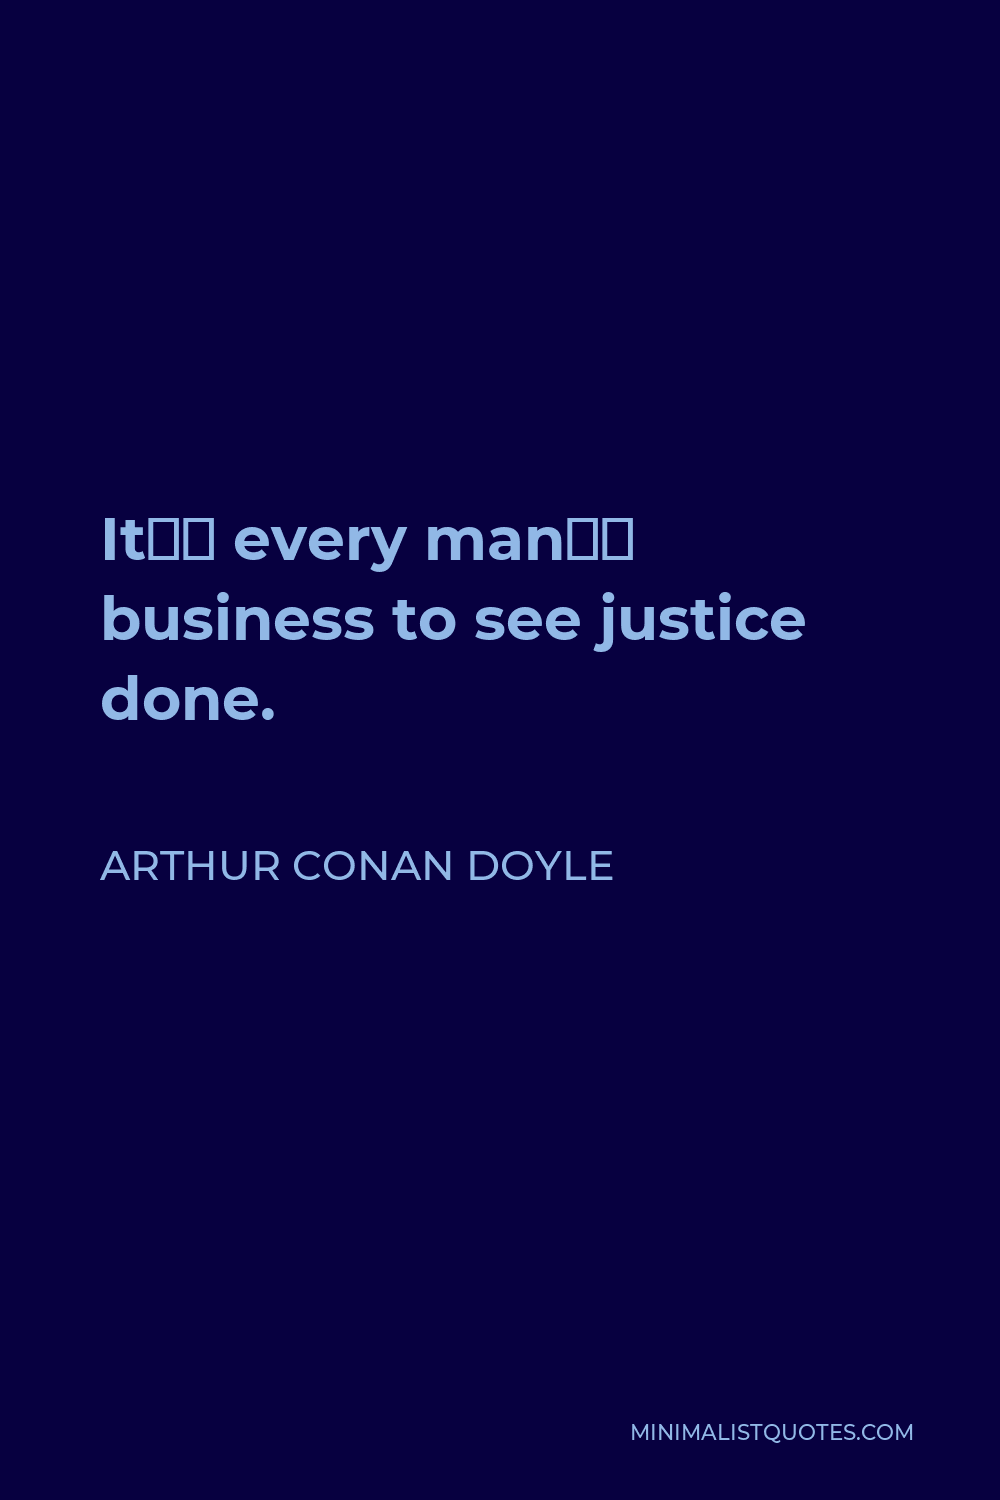 Arthur Conan Doyle Quote - It’s every man’s business to see justice done.